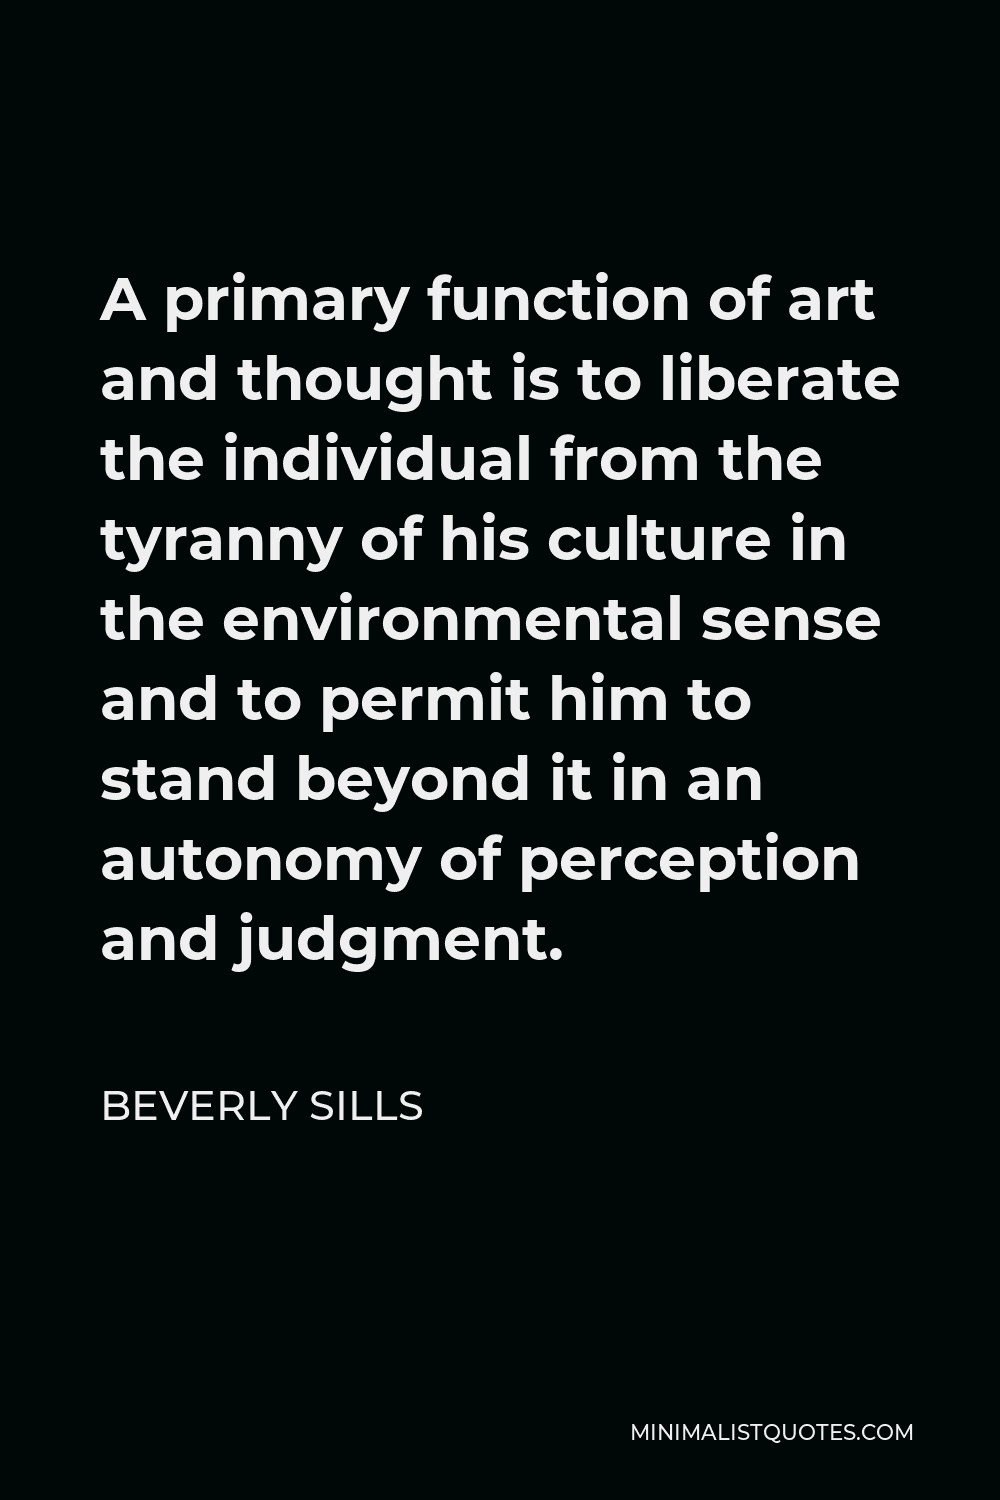 Beverly Sills Quote - A primary function of art and thought is to liberate the individual from the tyranny of his culture in the environmental sense and to permit him to stand beyond it in an autonomy of perception and judgment.